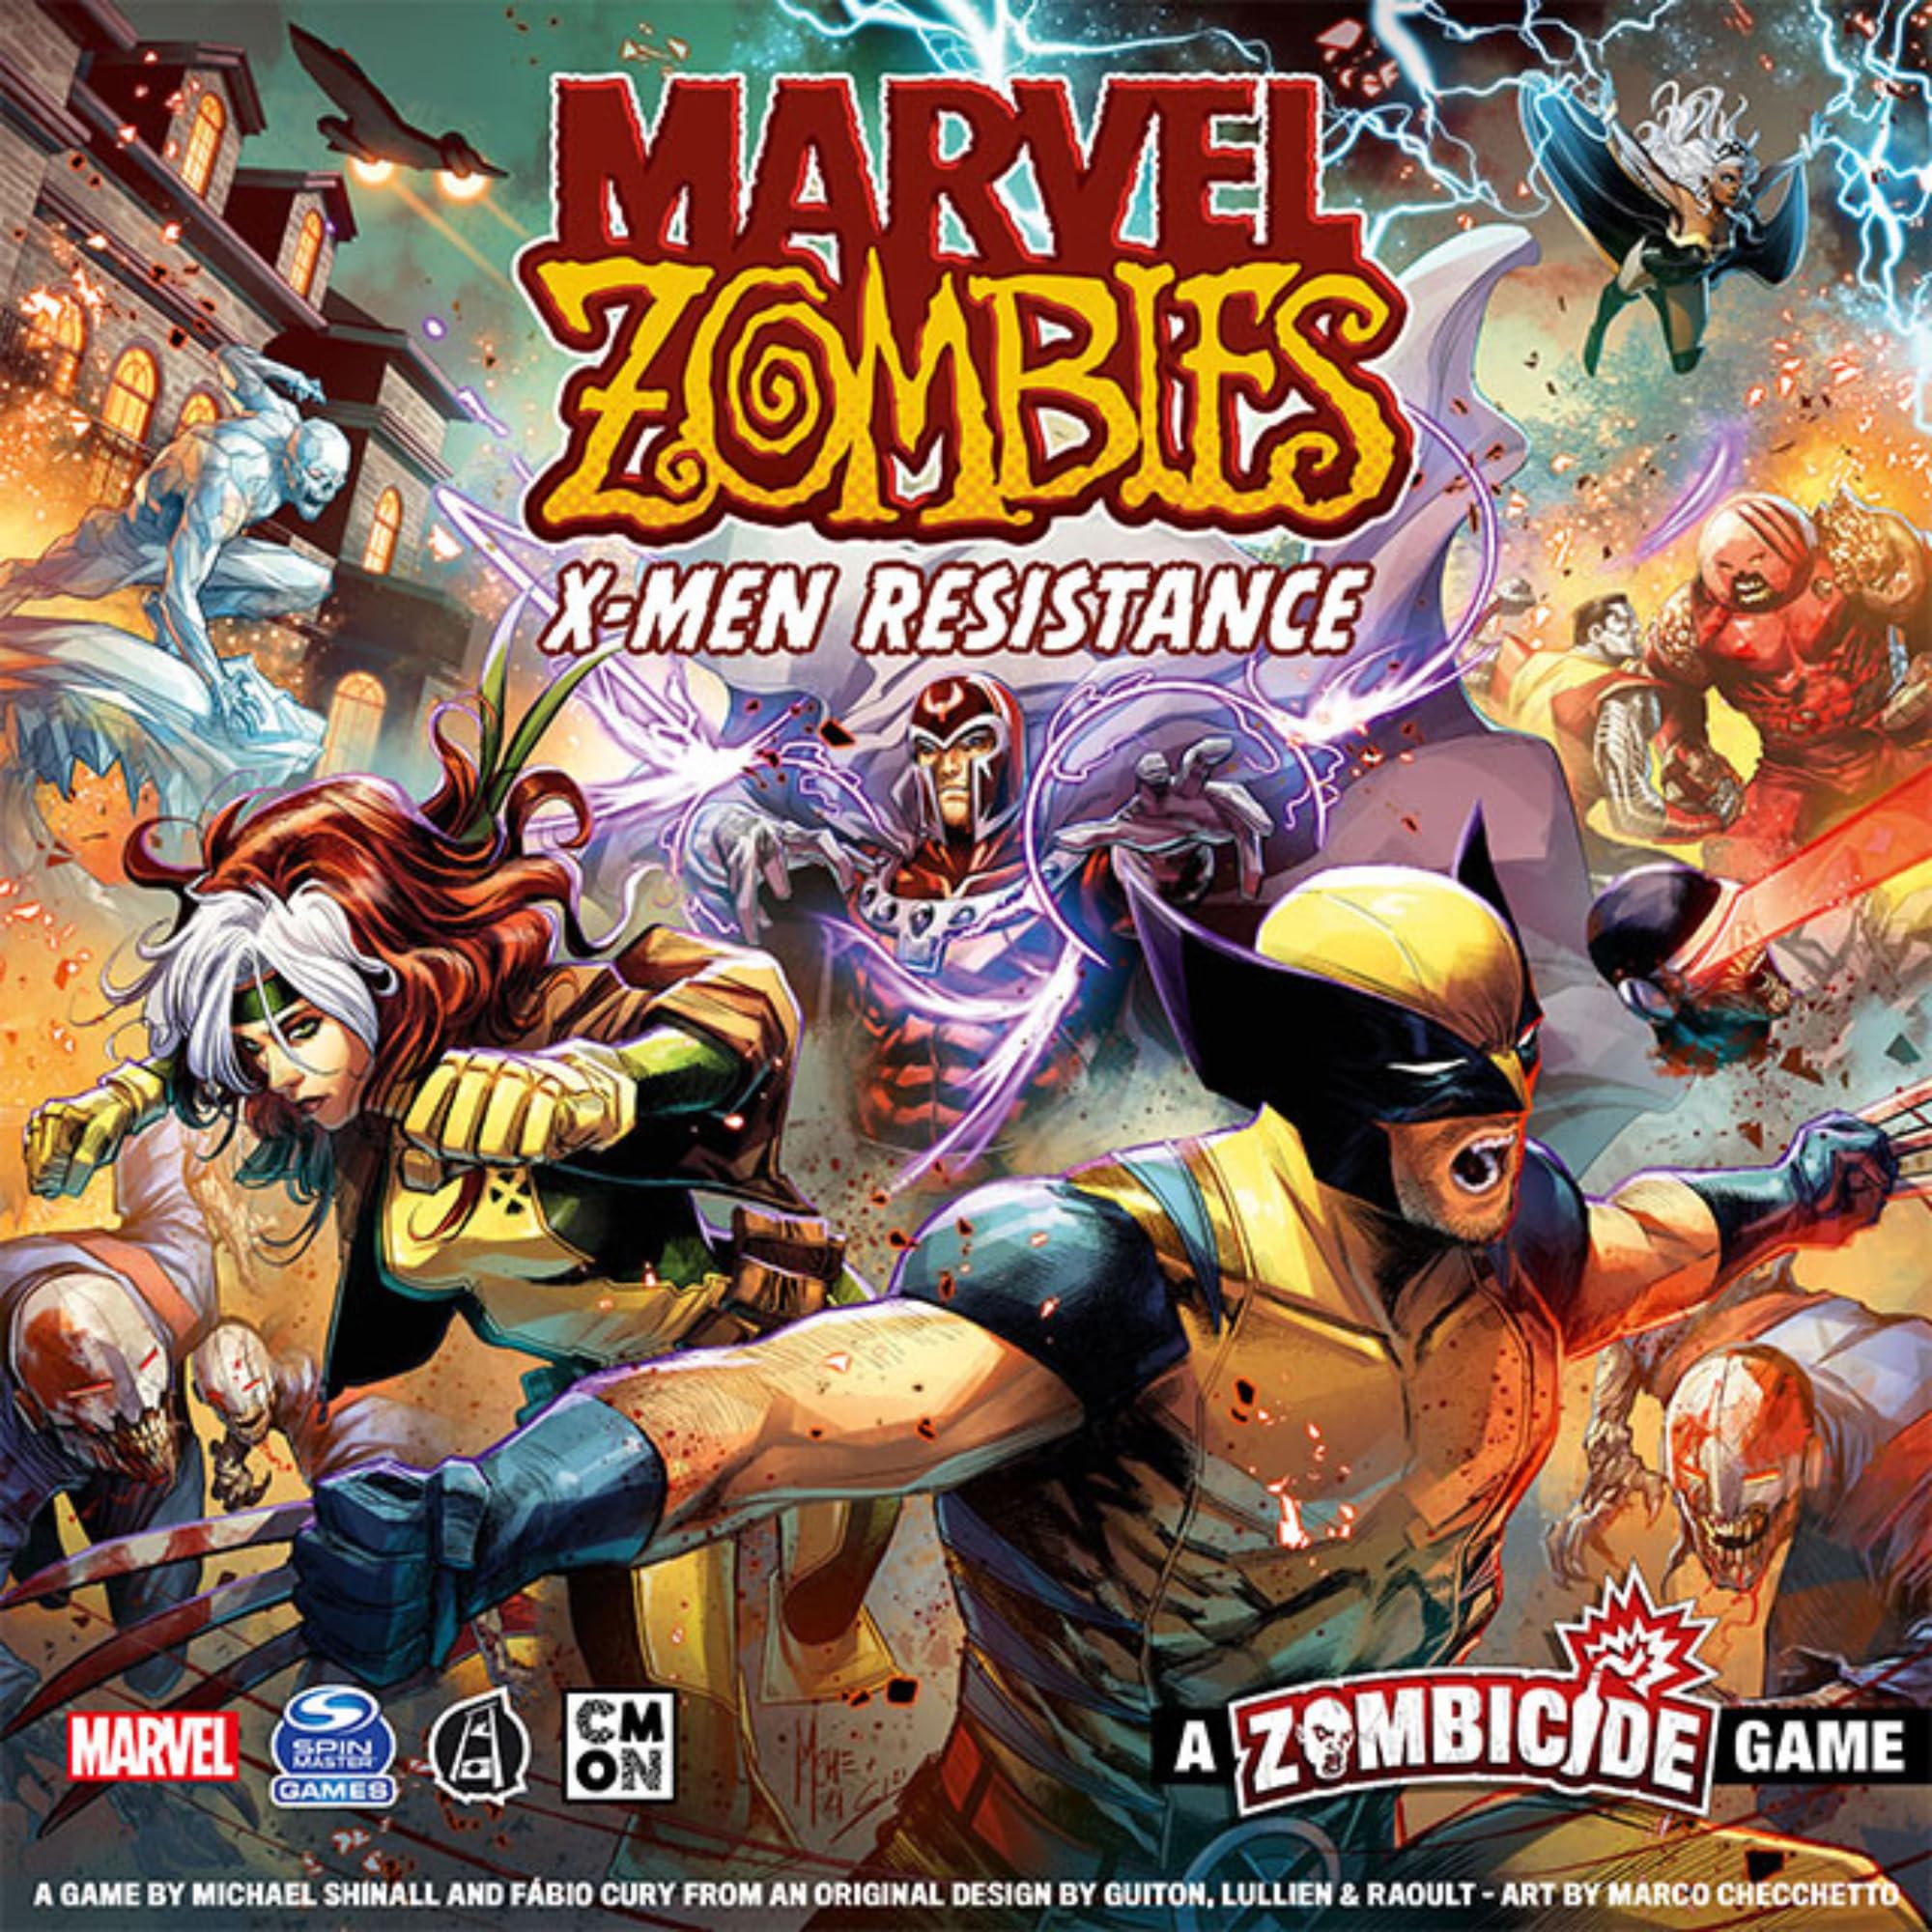 CMON Marvel Zombies X-Men Resistance (Core Box) - Strategy Board Game, Cooperative Game for Kids and Adults, Zombie Board Game, Ages 14+, 1-6 Players, 90 Minute Playtime, Made